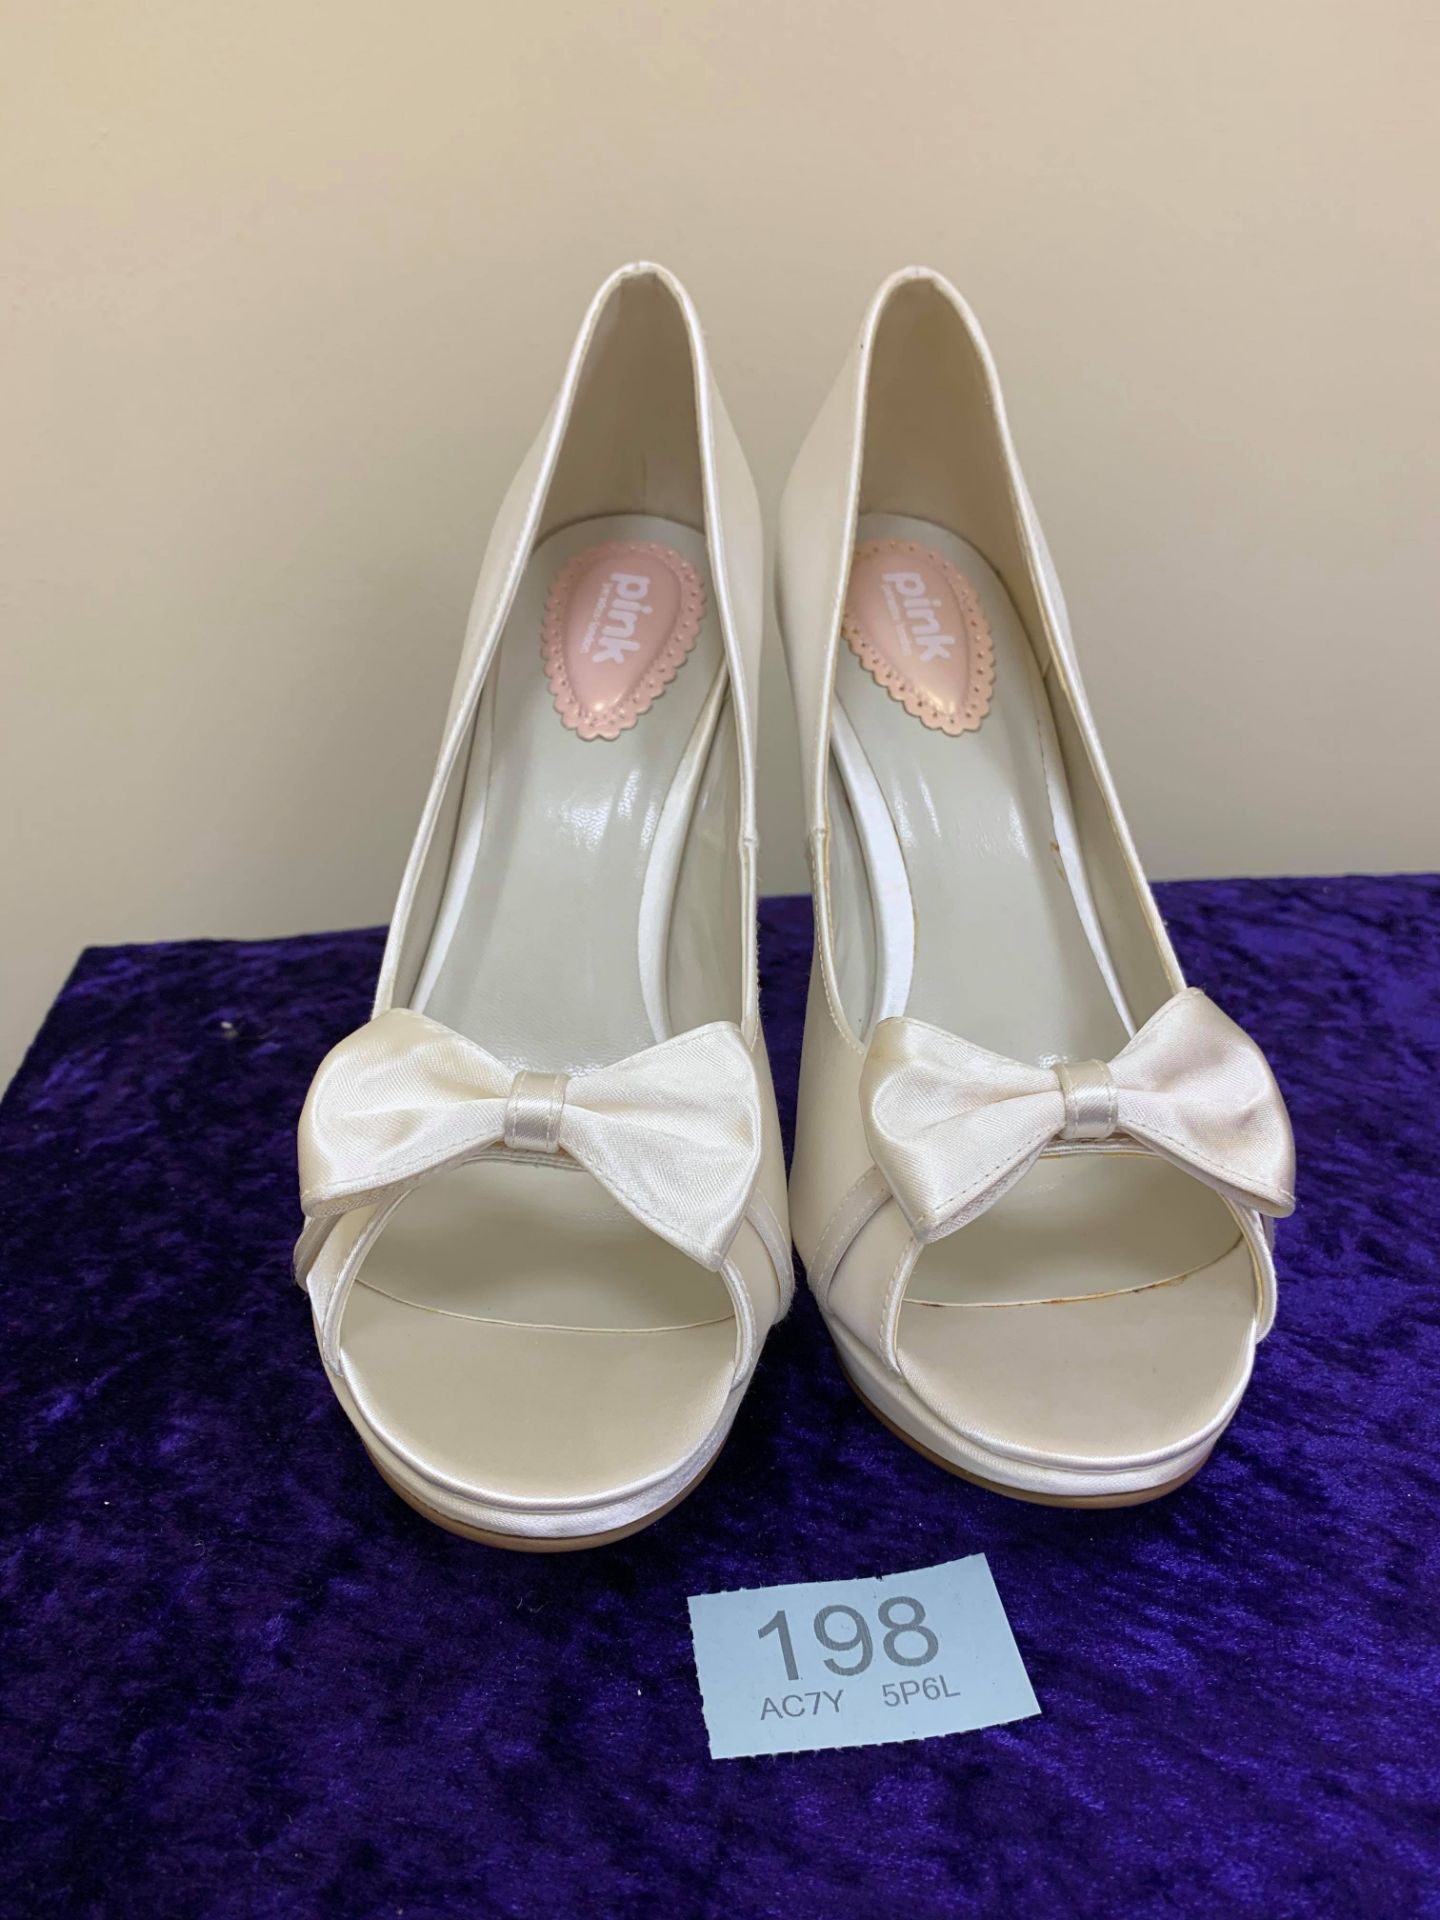 Designer Shoes Ivory In Size 40. Code 198 - Image 4 of 7